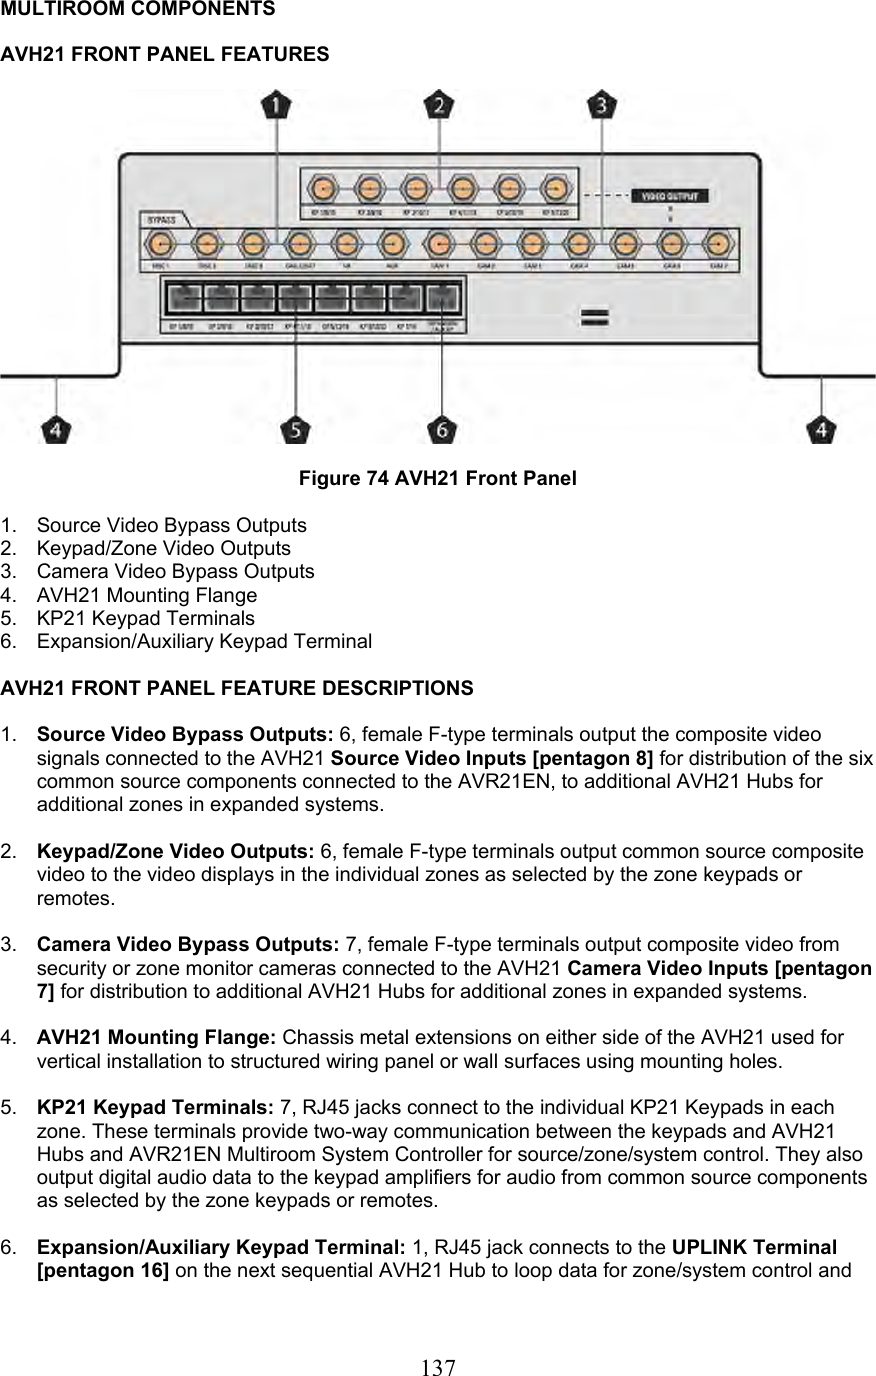  137MULTIROOM COMPONENTS  AVH21 FRONT PANEL FEATURES    Figure 74 AVH21 Front Panel  1.  Source Video Bypass Outputs 2.  Keypad/Zone Video Outputs 3.  Camera Video Bypass Outputs 4.  AVH21 Mounting Flange 5. KP21 Keypad Terminals 6.  Expansion/Auxiliary Keypad Terminal  AVH21 FRONT PANEL FEATURE DESCRIPTIONS  1.  Source Video Bypass Outputs: 6, female F-type terminals output the composite video signals connected to the AVH21 Source Video Inputs [pentagon 8] for distribution of the six common source components connected to the AVR21EN, to additional AVH21 Hubs for additional zones in expanded systems.  2.  Keypad/Zone Video Outputs: 6, female F-type terminals output common source composite video to the video displays in the individual zones as selected by the zone keypads or remotes.  3.  Camera Video Bypass Outputs: 7, female F-type terminals output composite video from security or zone monitor cameras connected to the AVH21 Camera Video Inputs [pentagon 7] for distribution to additional AVH21 Hubs for additional zones in expanded systems.  4.  AVH21 Mounting Flange: Chassis metal extensions on either side of the AVH21 used for vertical installation to structured wiring panel or wall surfaces using mounting holes.  5.  KP21 Keypad Terminals: 7, RJ45 jacks connect to the individual KP21 Keypads in each zone. These terminals provide two-way communication between the keypads and AVH21 Hubs and AVR21EN Multiroom System Controller for source/zone/system control. They also output digital audio data to the keypad amplifiers for audio from common source components as selected by the zone keypads or remotes.  6.  Expansion/Auxiliary Keypad Terminal: 1, RJ45 jack connects to the UPLINK Terminal [pentagon 16] on the next sequential AVH21 Hub to loop data for zone/system control and 